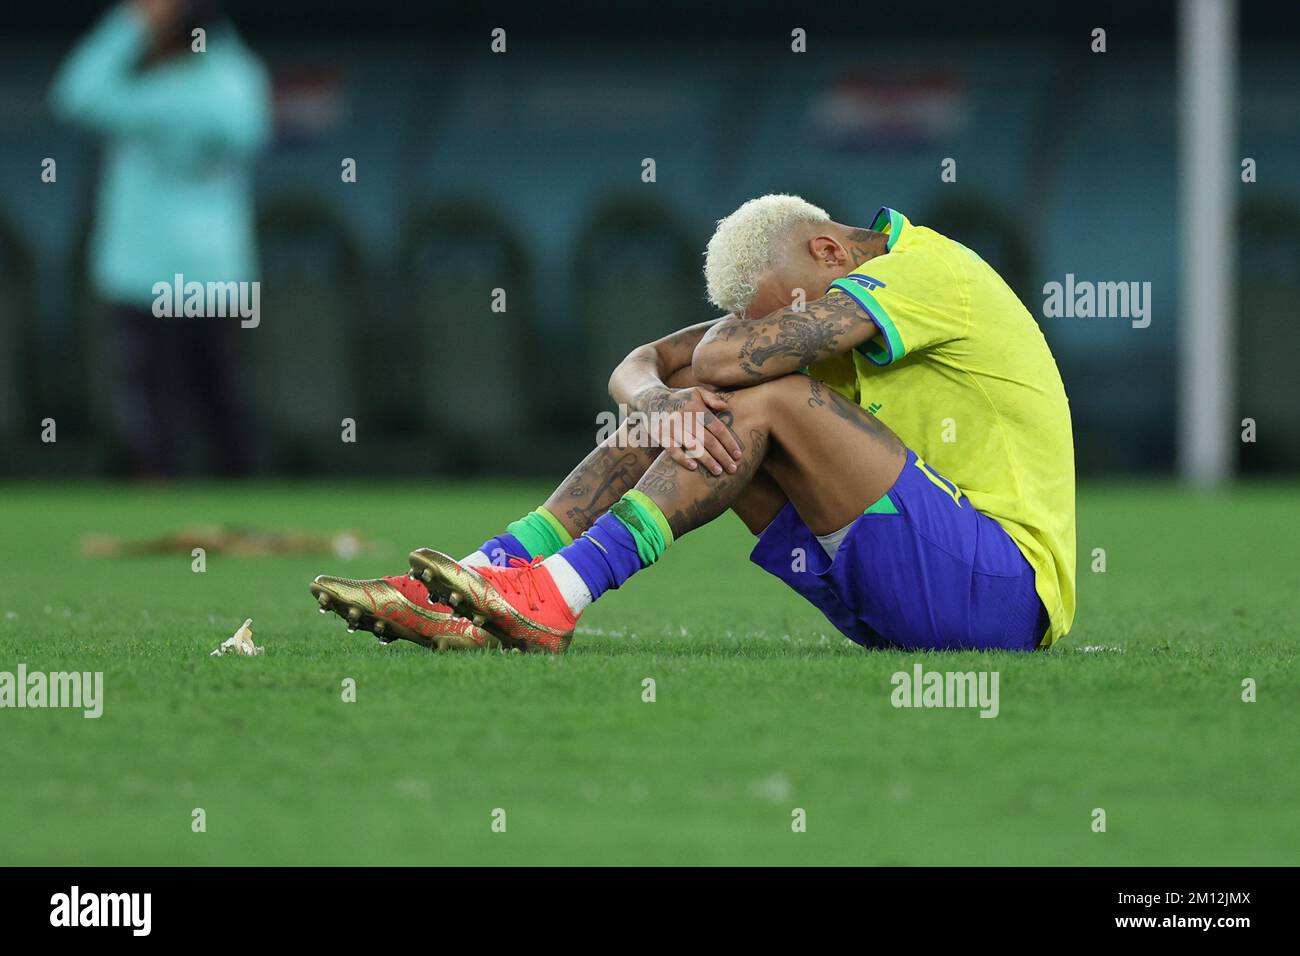 Doha, Qatar. 09th Dec, 2022. Neymar Brazil player cries during a match against Croatia valid for the quarterfinals of the FIFA World Cup in Qatar at Education City Stadium in Doha, Qatar. December 9, 2022 Photo:William Volcov Credit: Brazil Photo Press/Alamy Live News Stock Photo